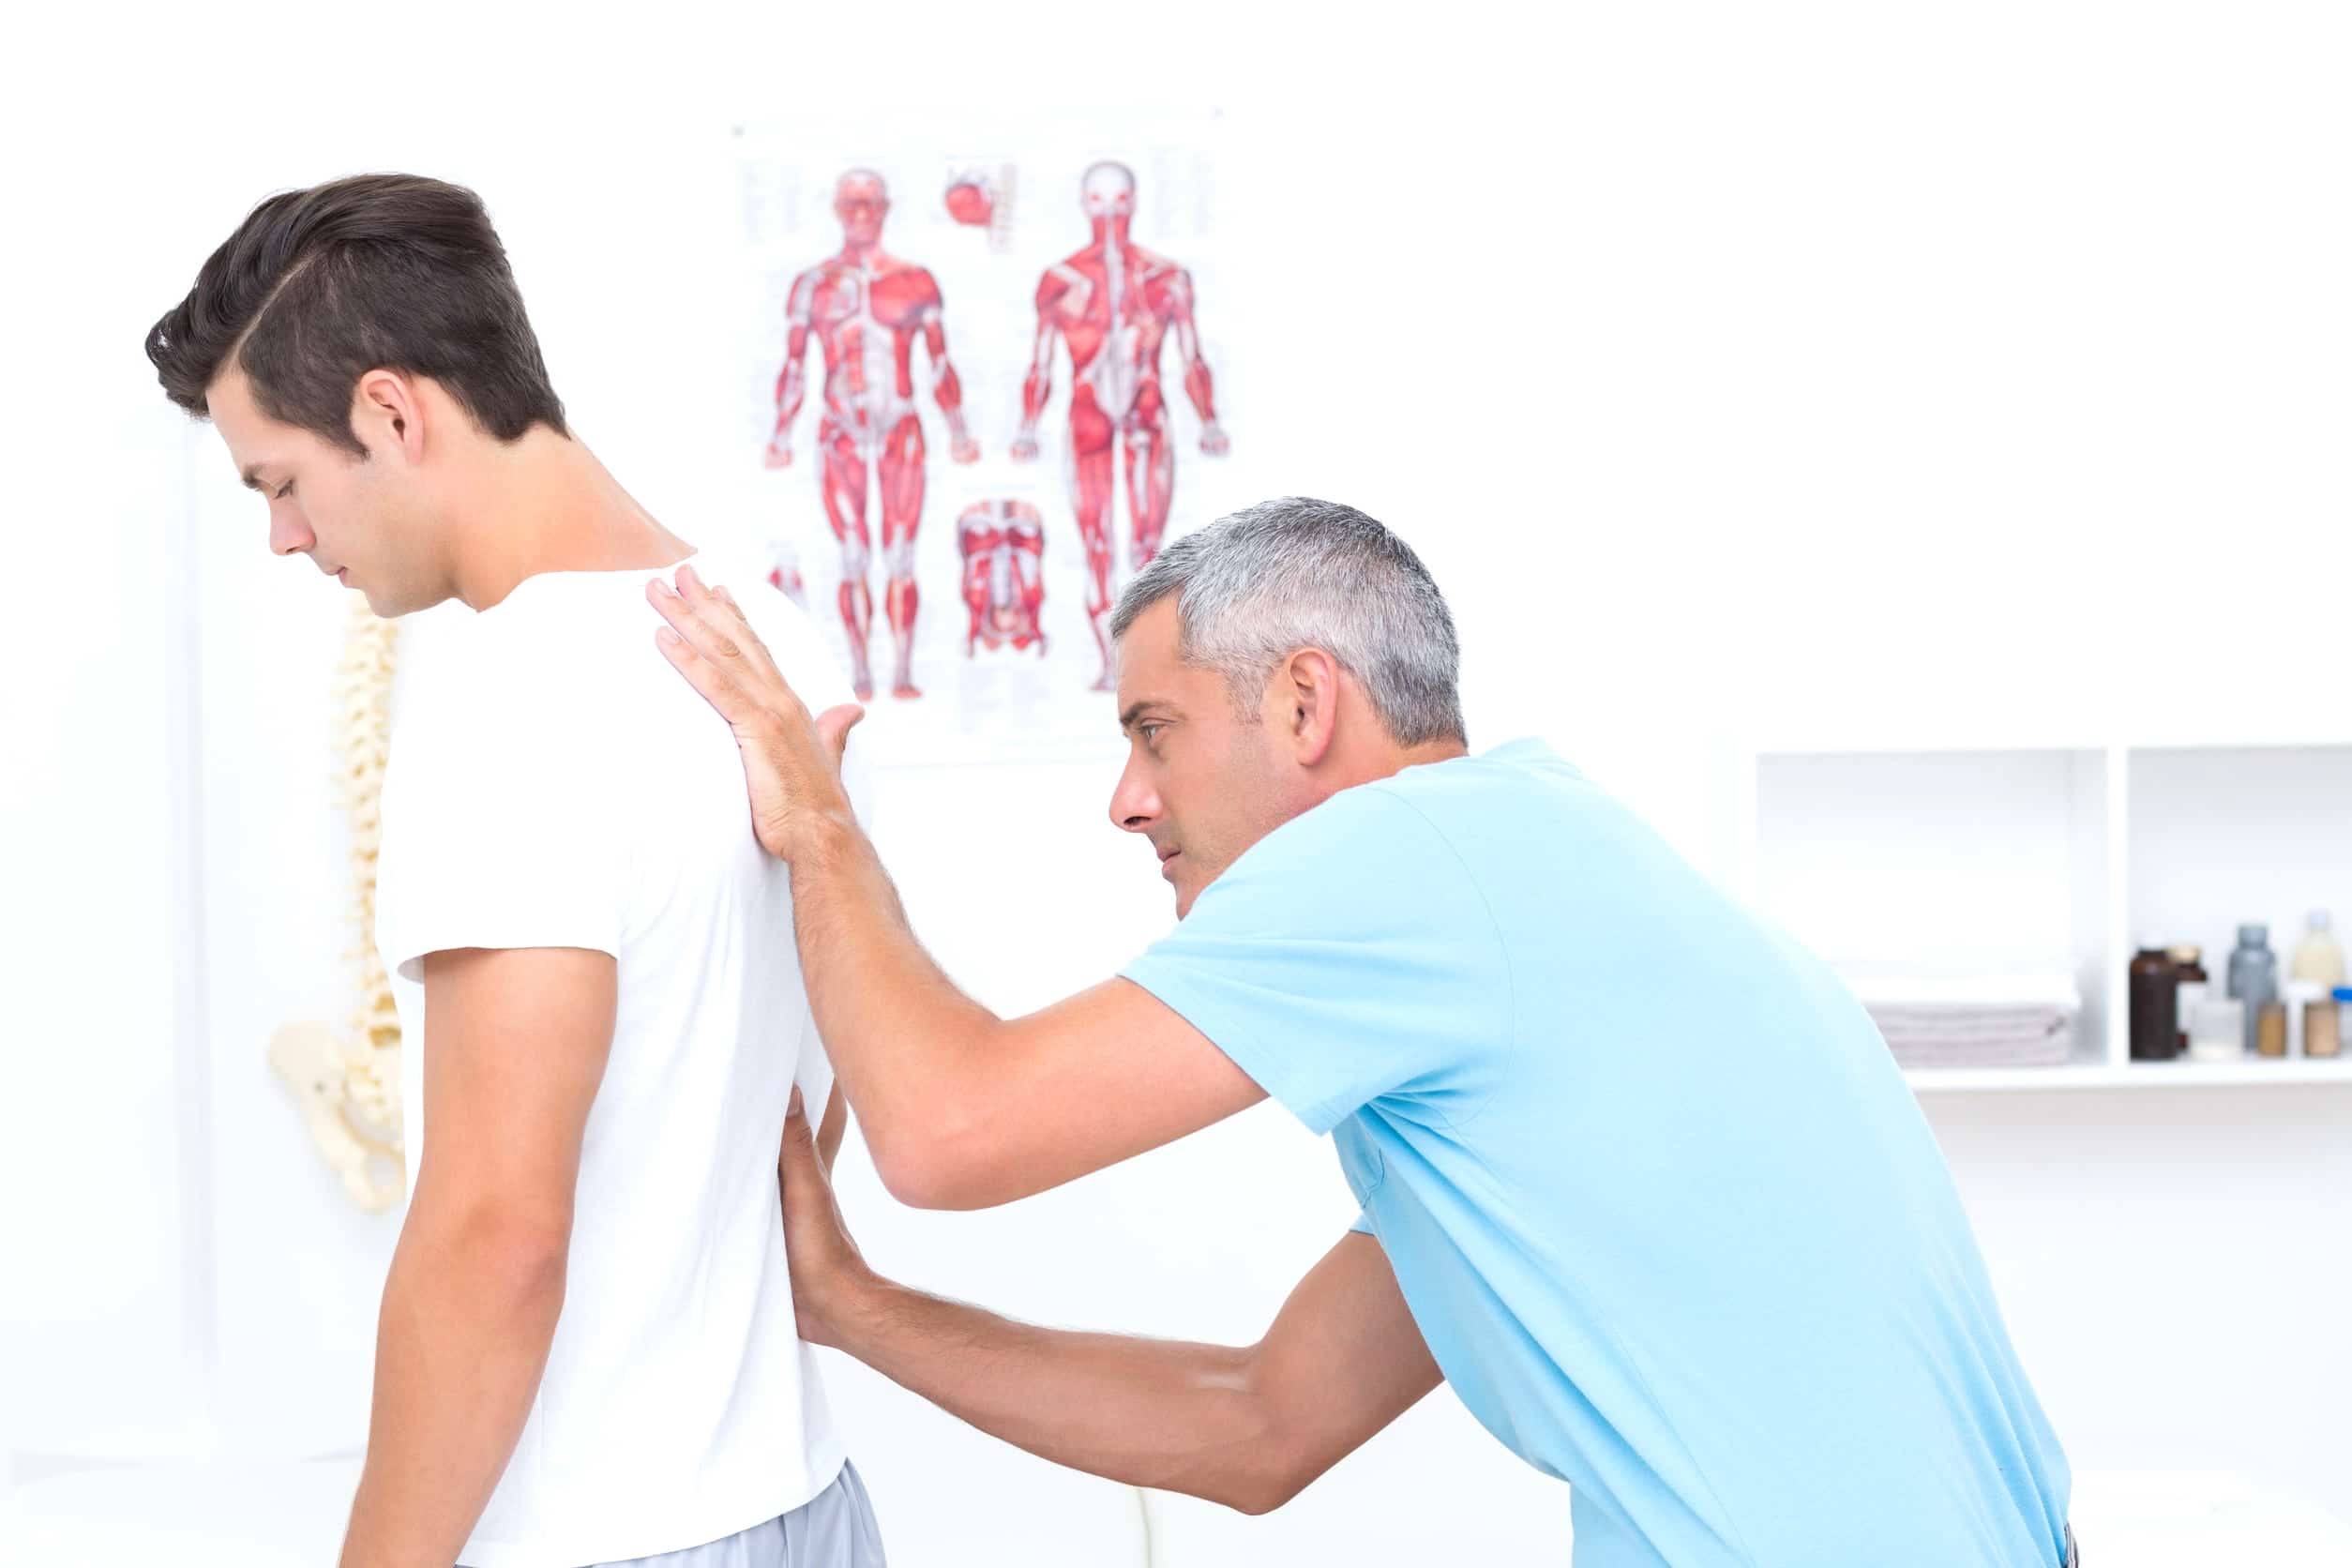 PHYSICAL THERAPY FOR HEALTHY LIVING